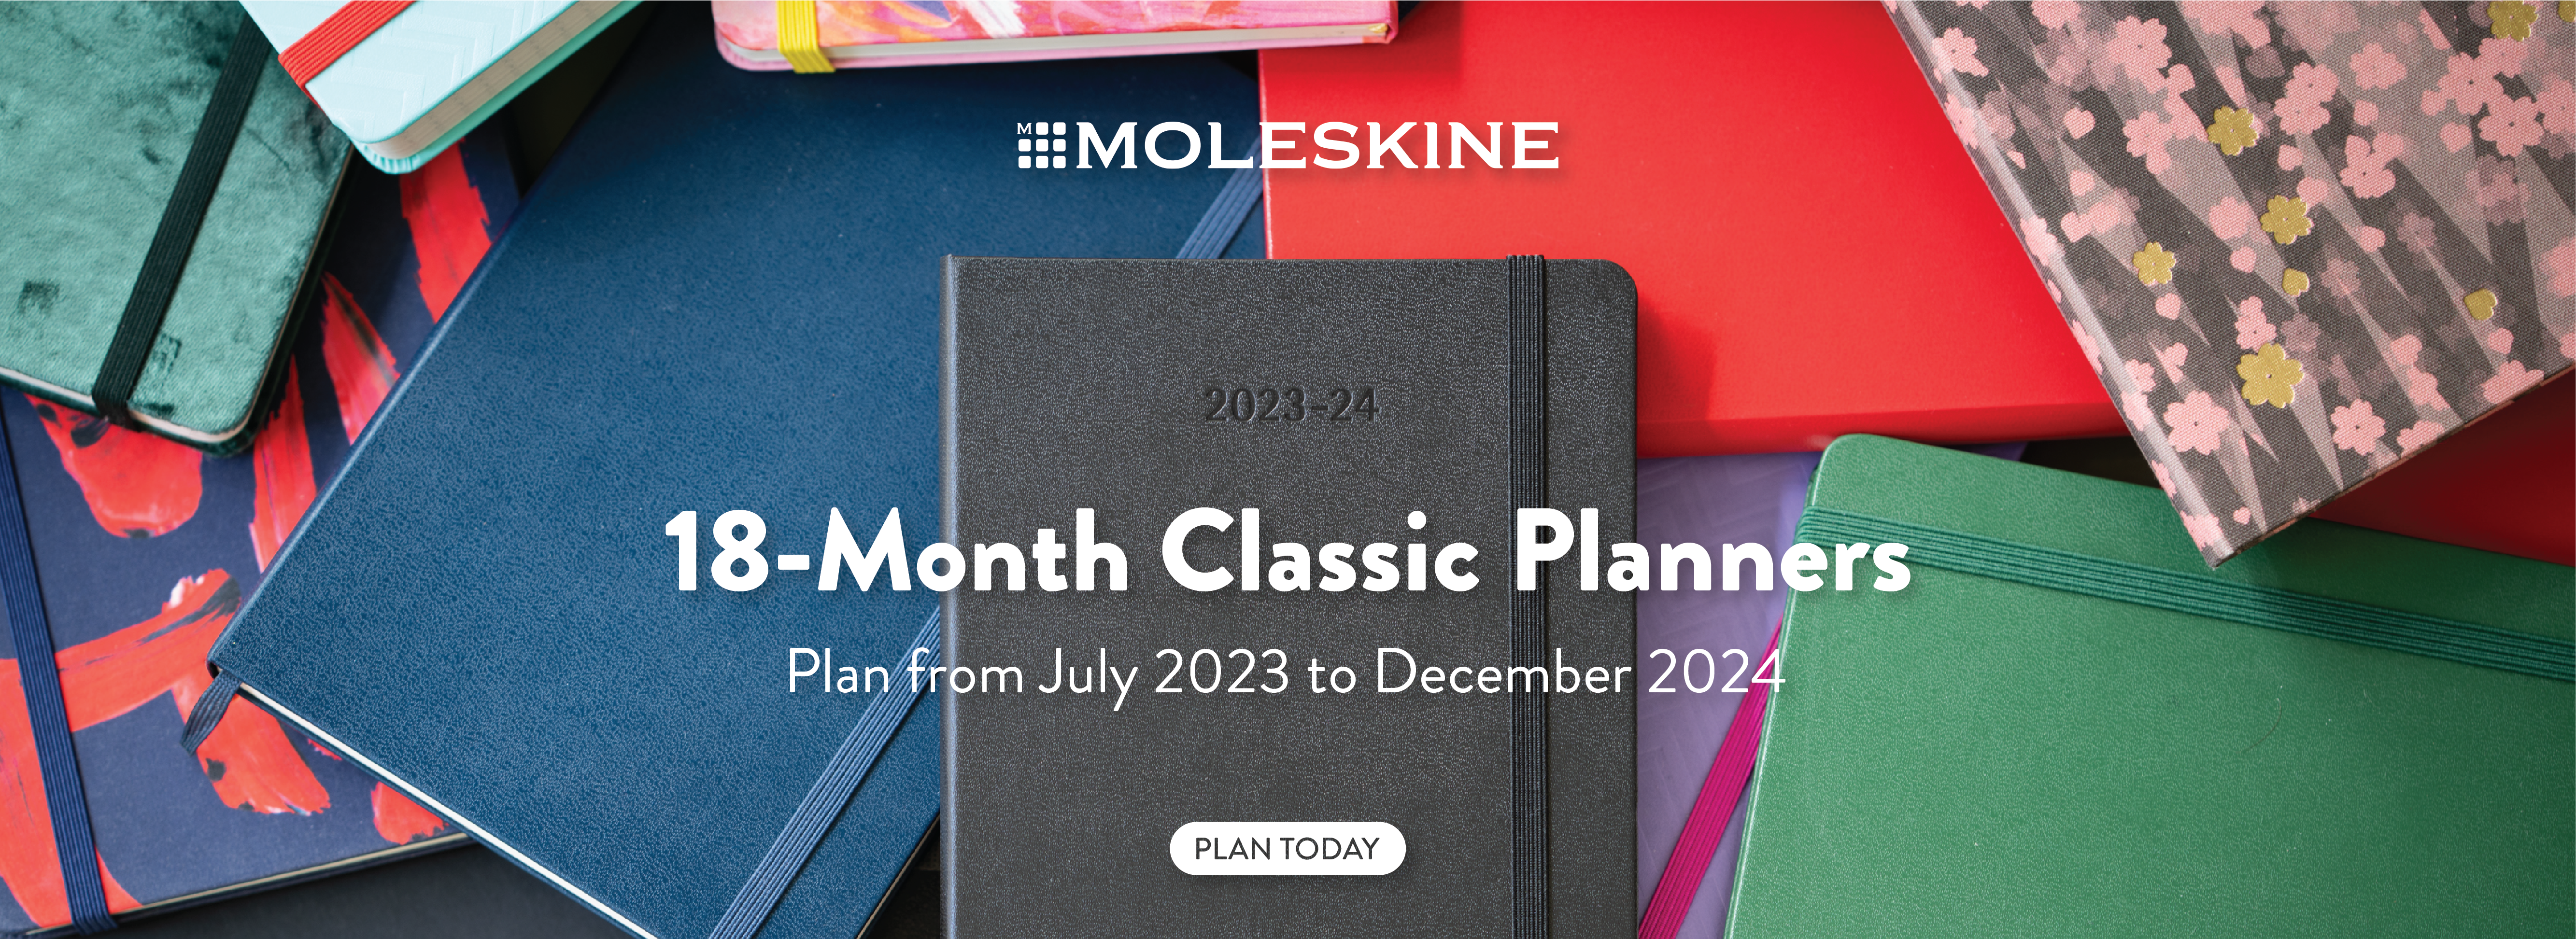 Moleskine 18-Month Classic Planners